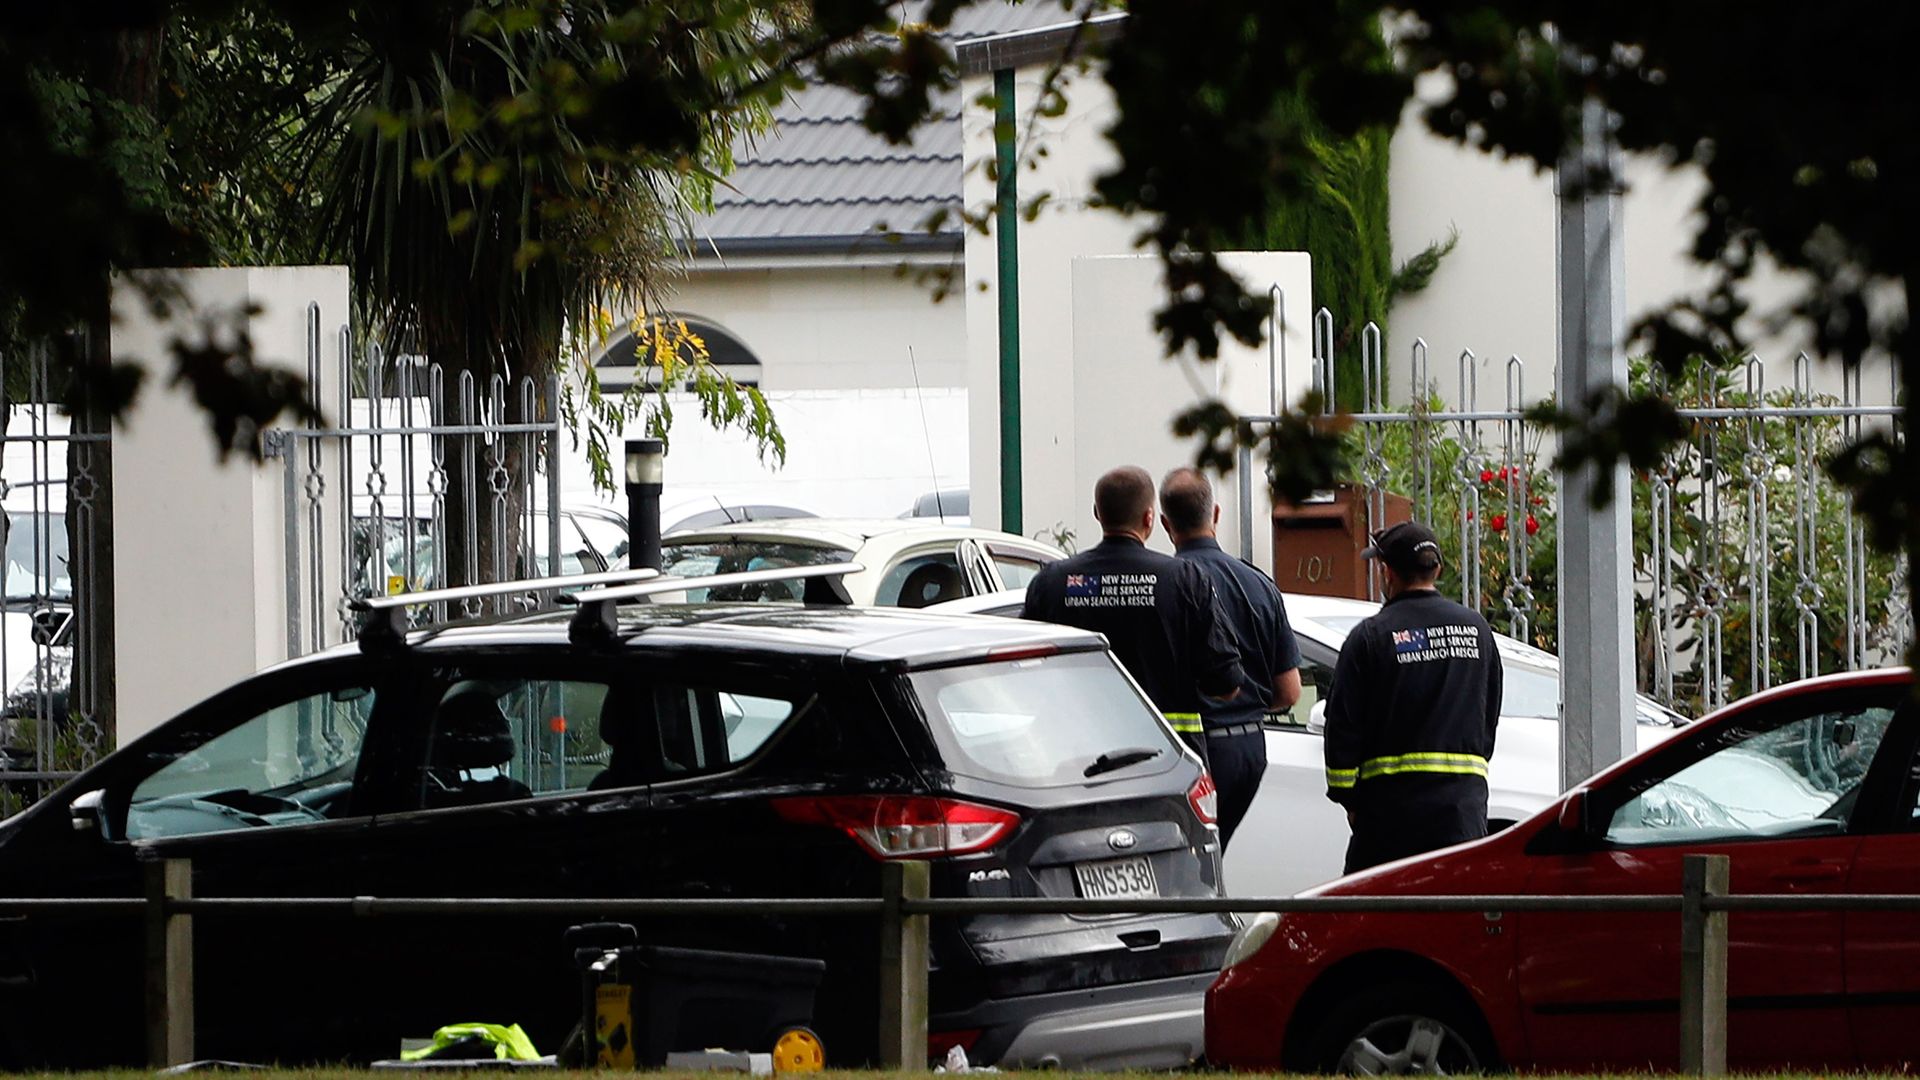 New Zealand police stand outside one of the mosques that was targeted in the shootings